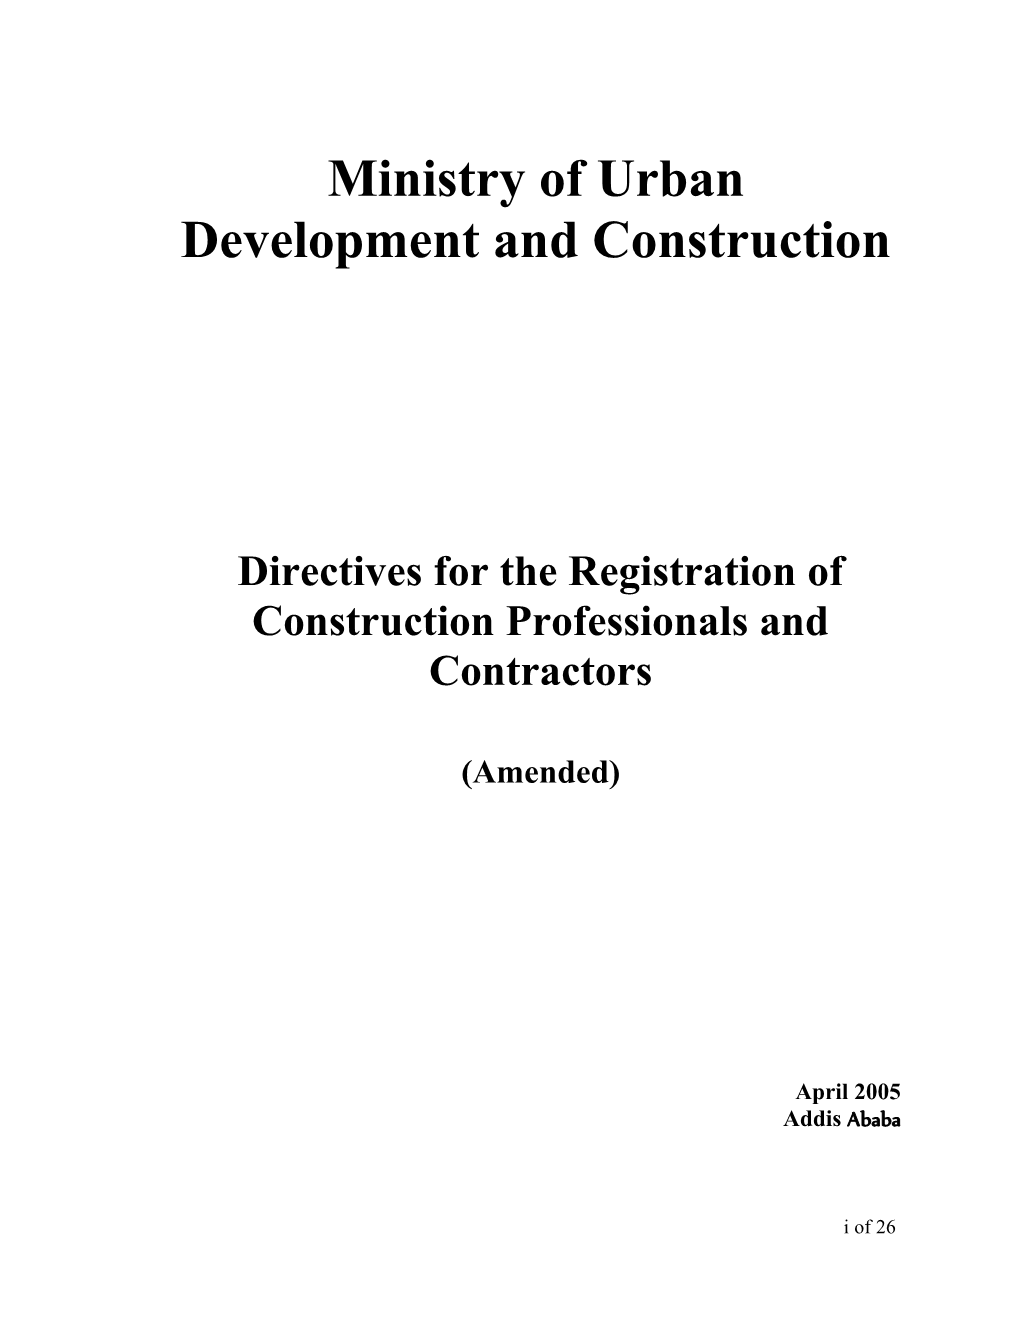 Directives for the Registration of Construction Professionals and Contractors